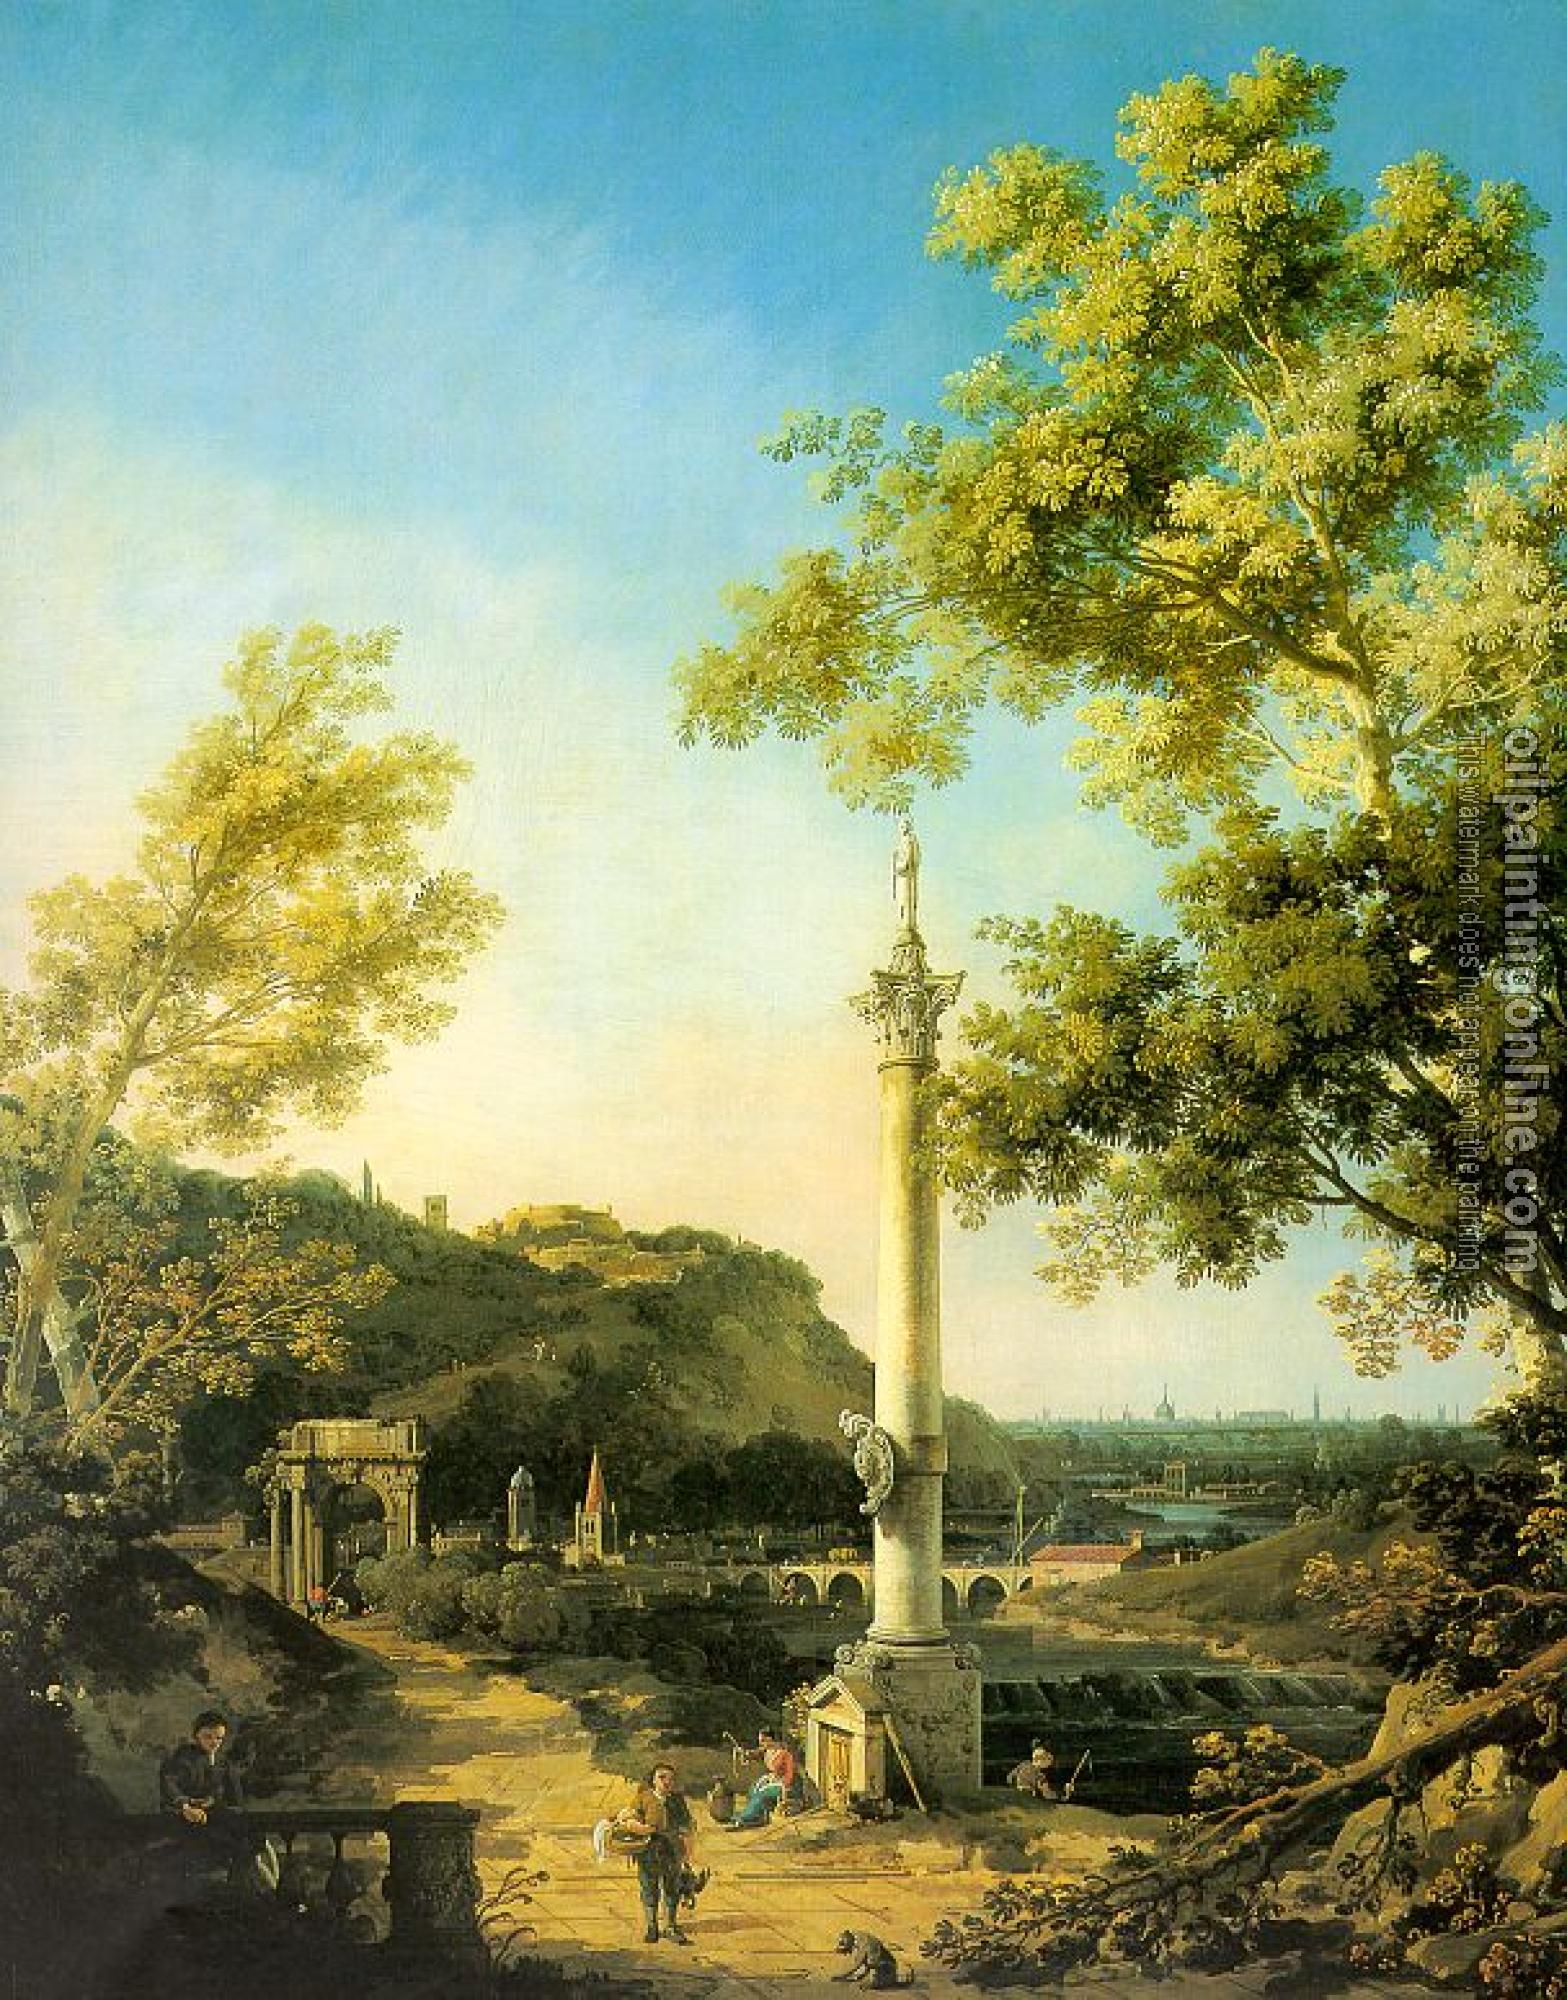 Canaletto - Capriccio- River Landscape with a Column, a Ruined Roman Arch, and Reminiscences of England